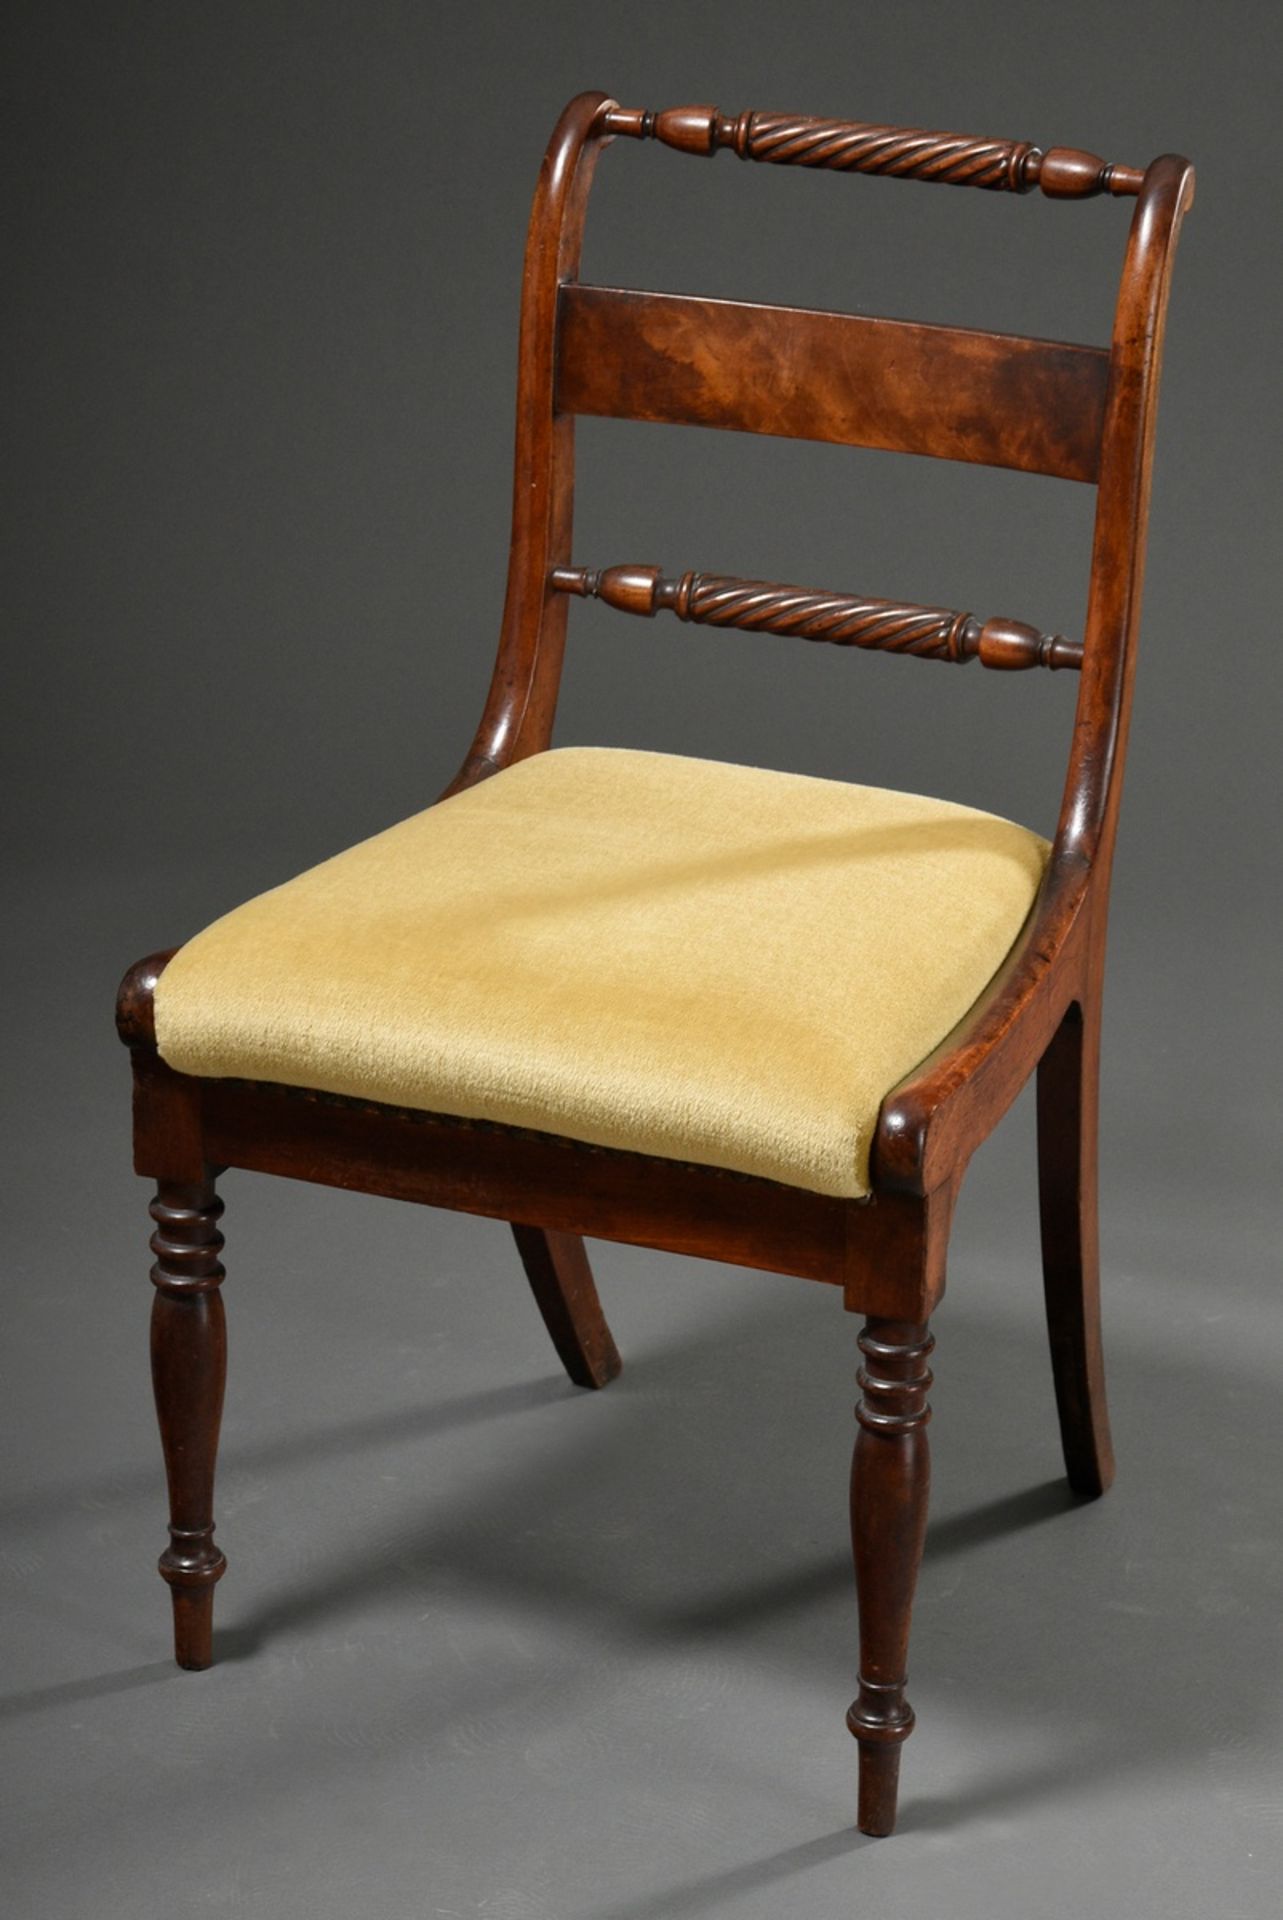 Biedermeier chair with turned rollers in the backrest, mahogany, light upholstery, h. 46/84cm